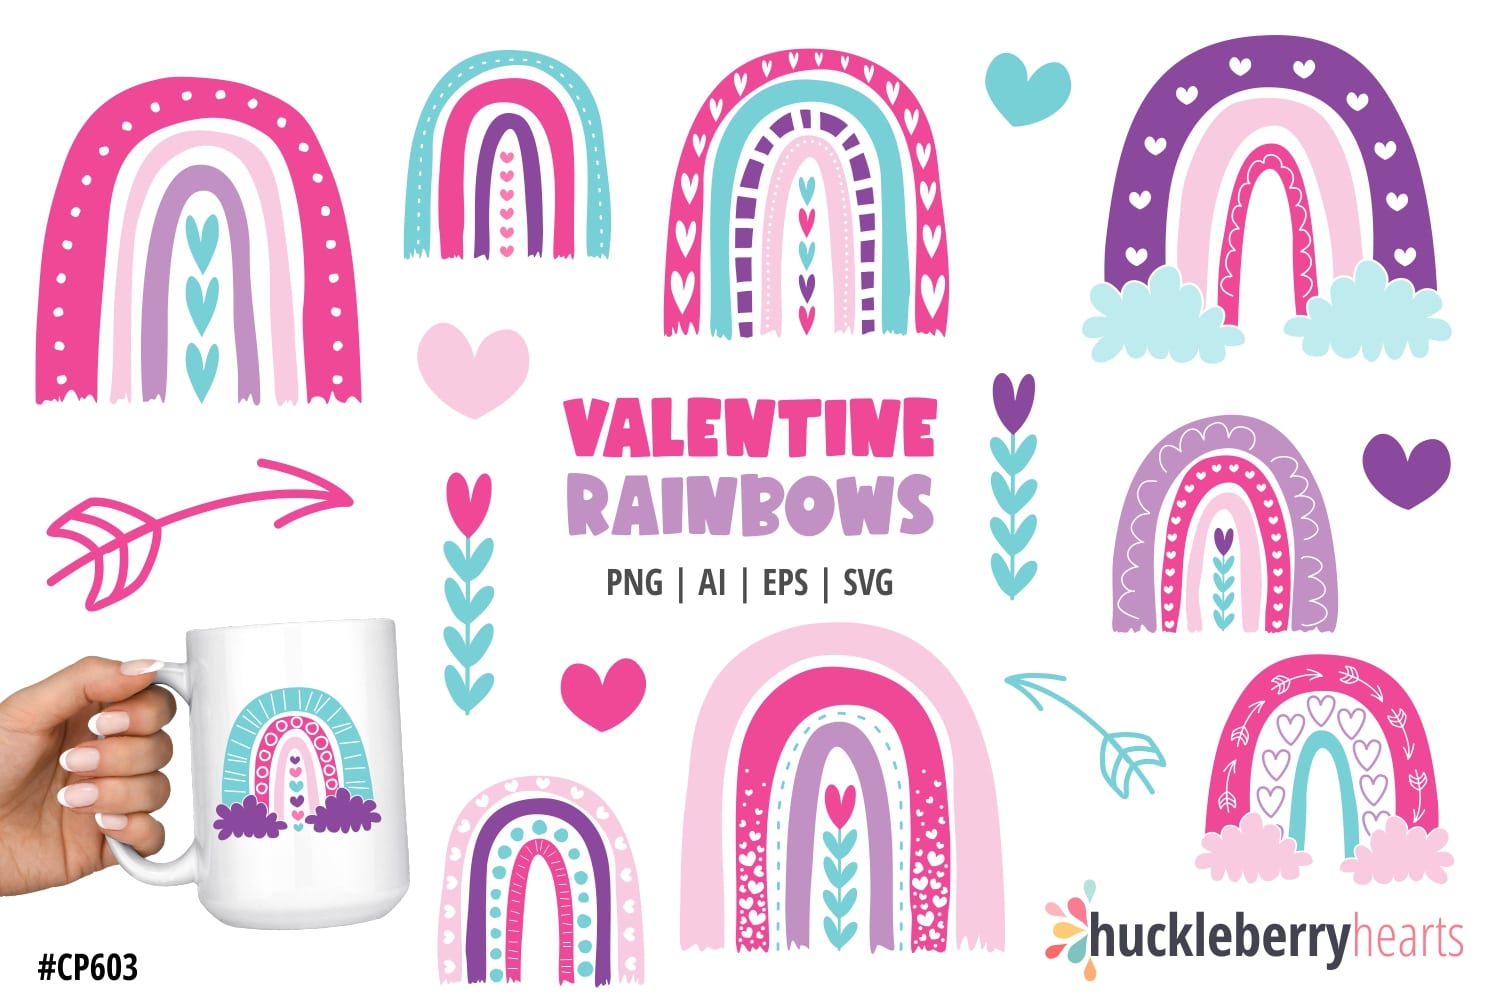 Assorted Valentine’s Day themed rainbow cliparts